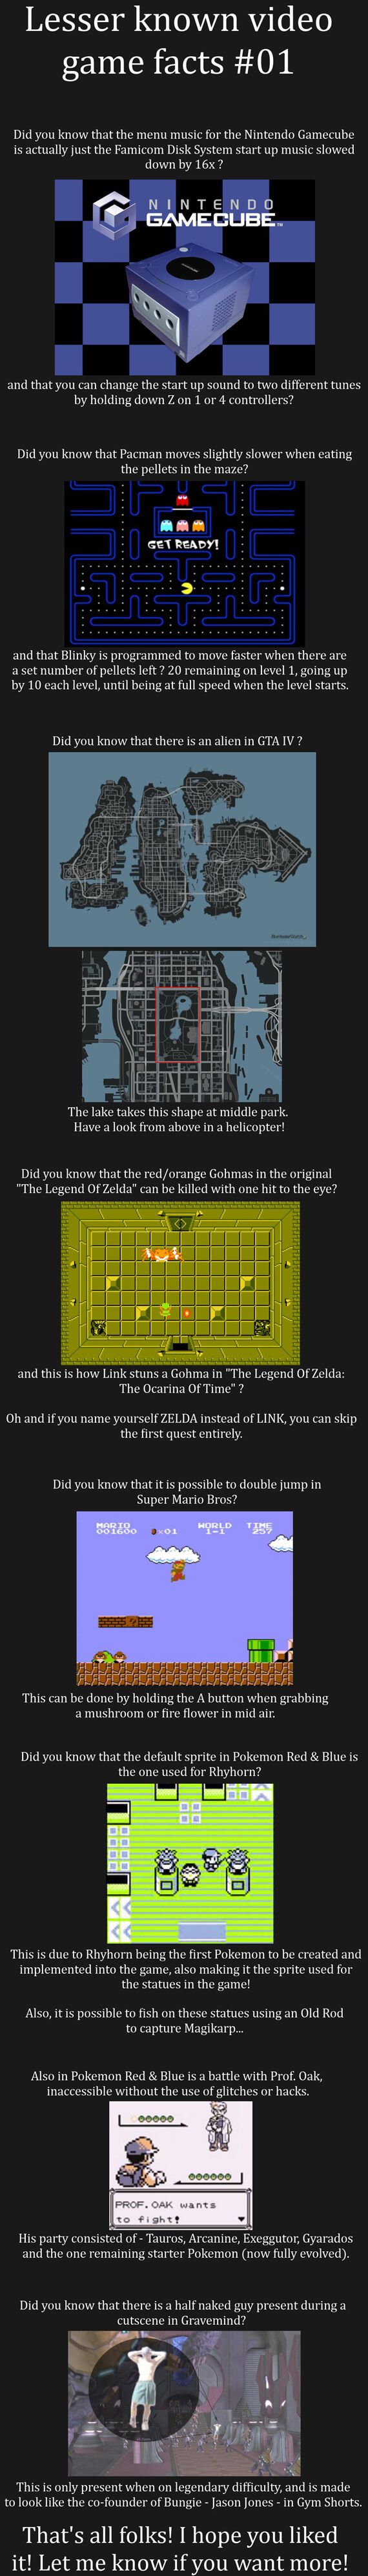 Lesser Known Video Game Facts